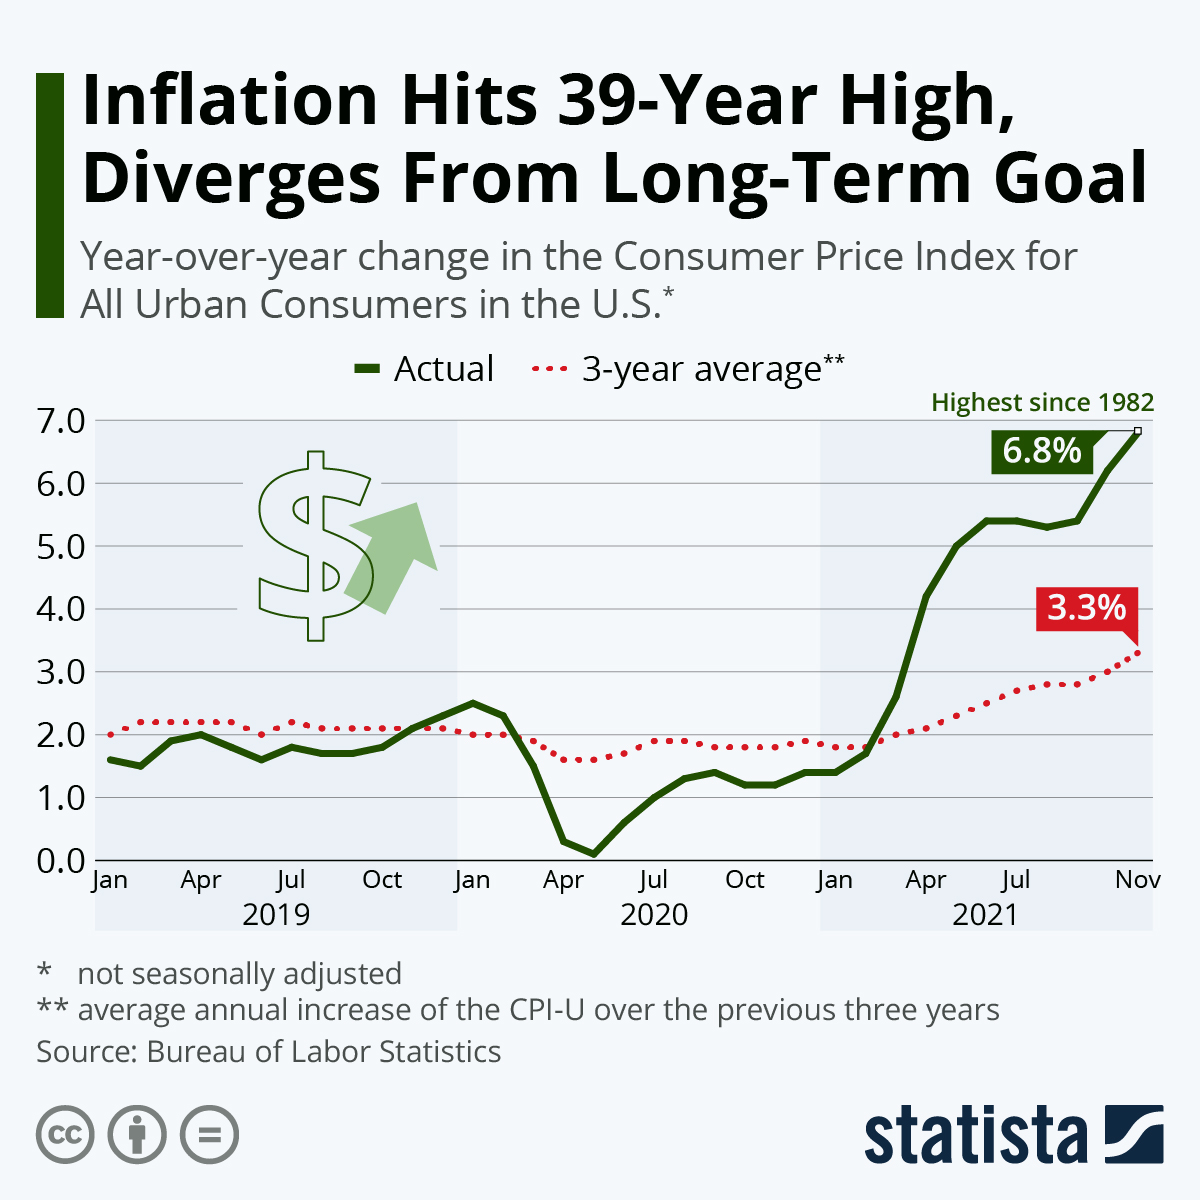 Inflation Hits 39-Year High, Diverges From Long-Term Goal